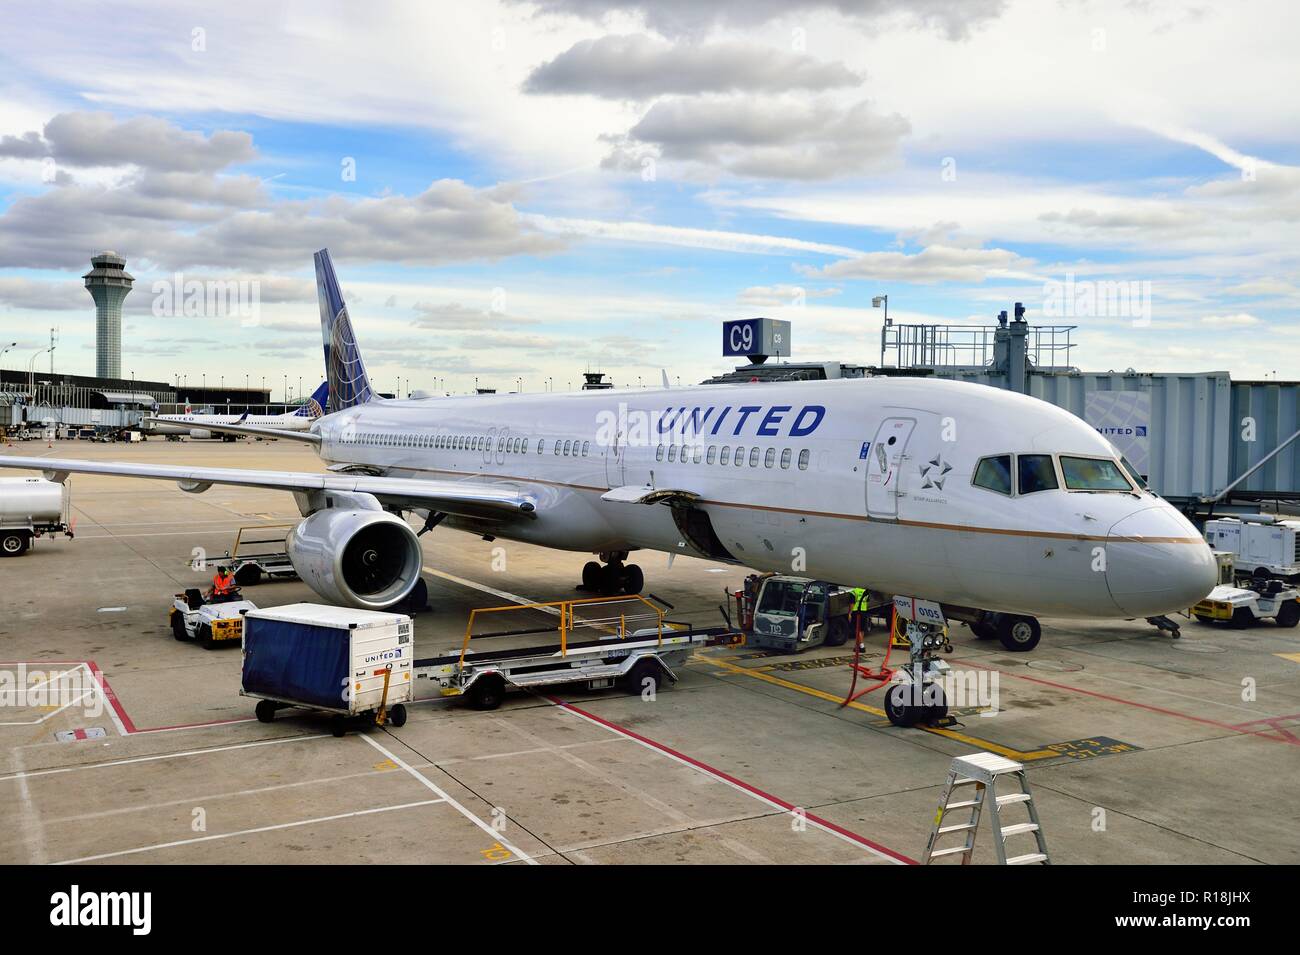 Chicago, Illinois, USA. A United Airlines jet aircraft being prepared for a journey at O'Hare International Airport. Stock Photo